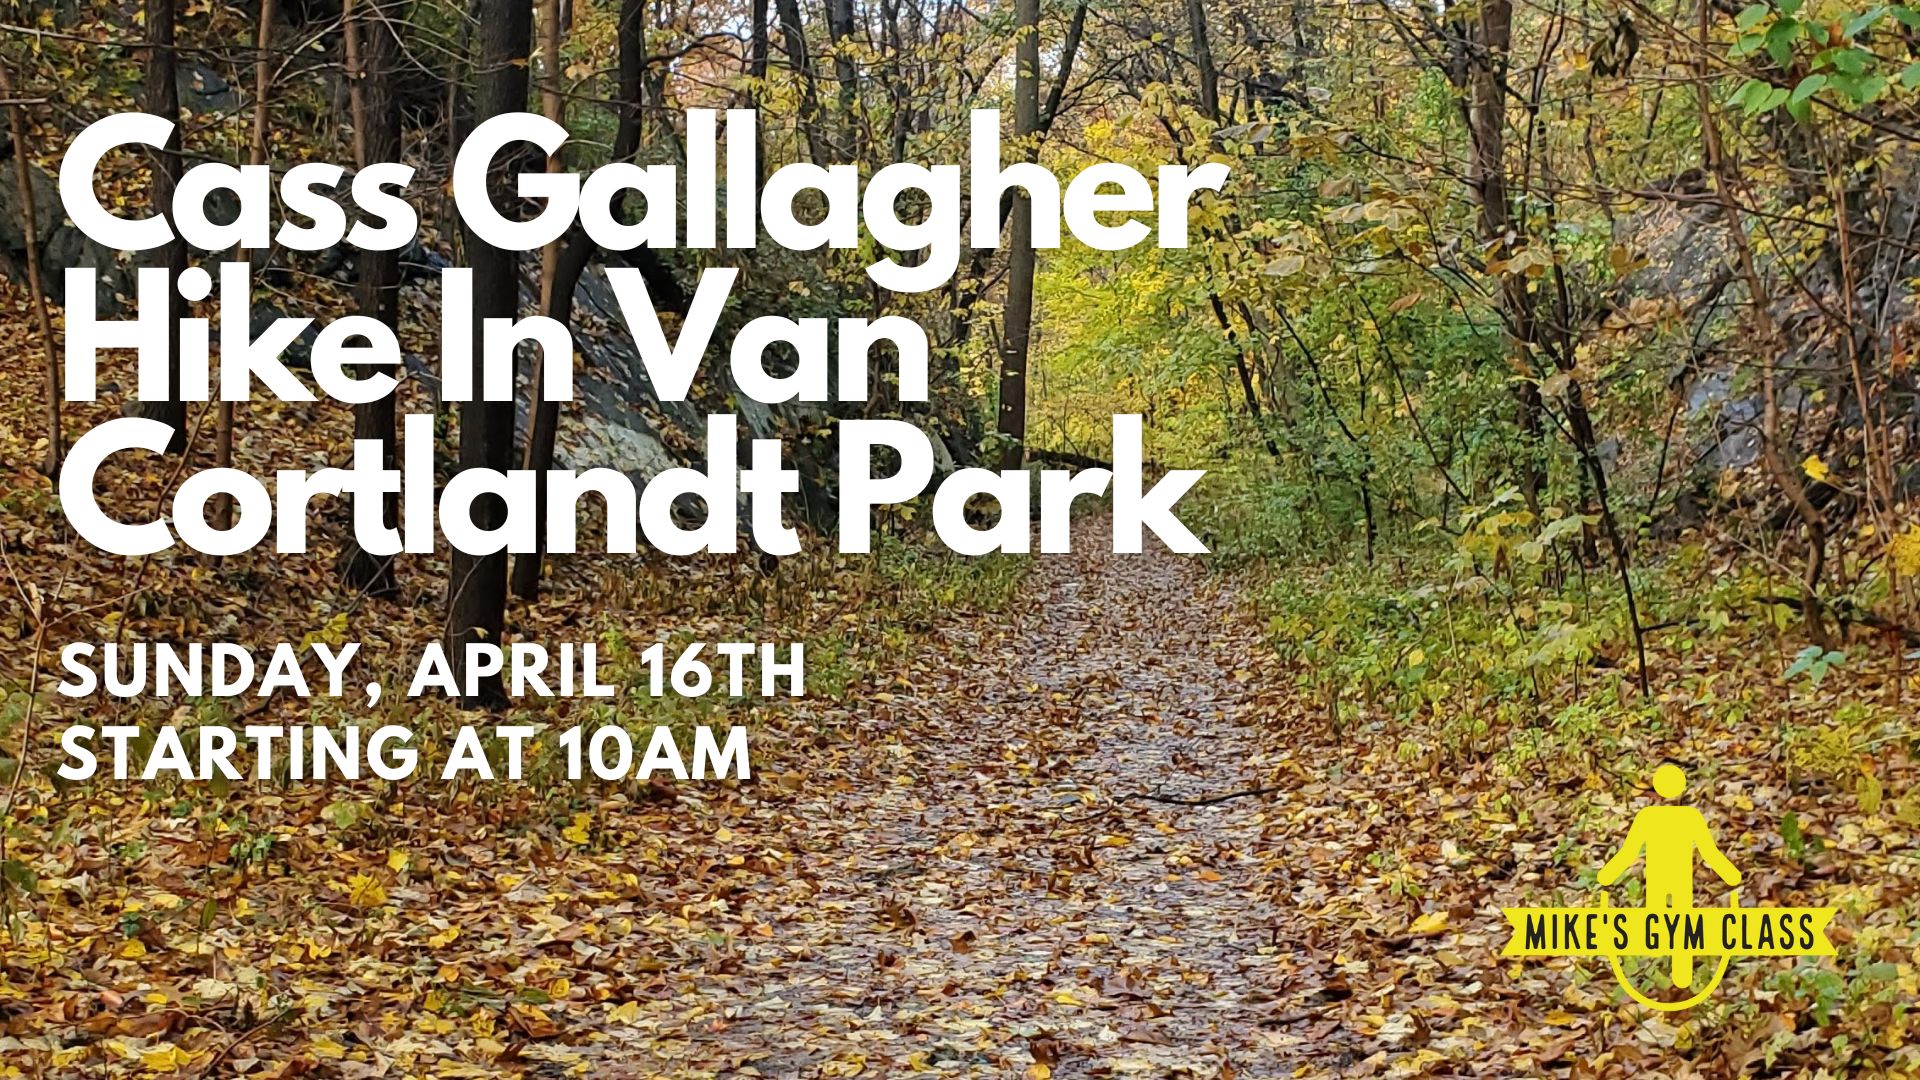 Cass Gallagher Hike on April 16h